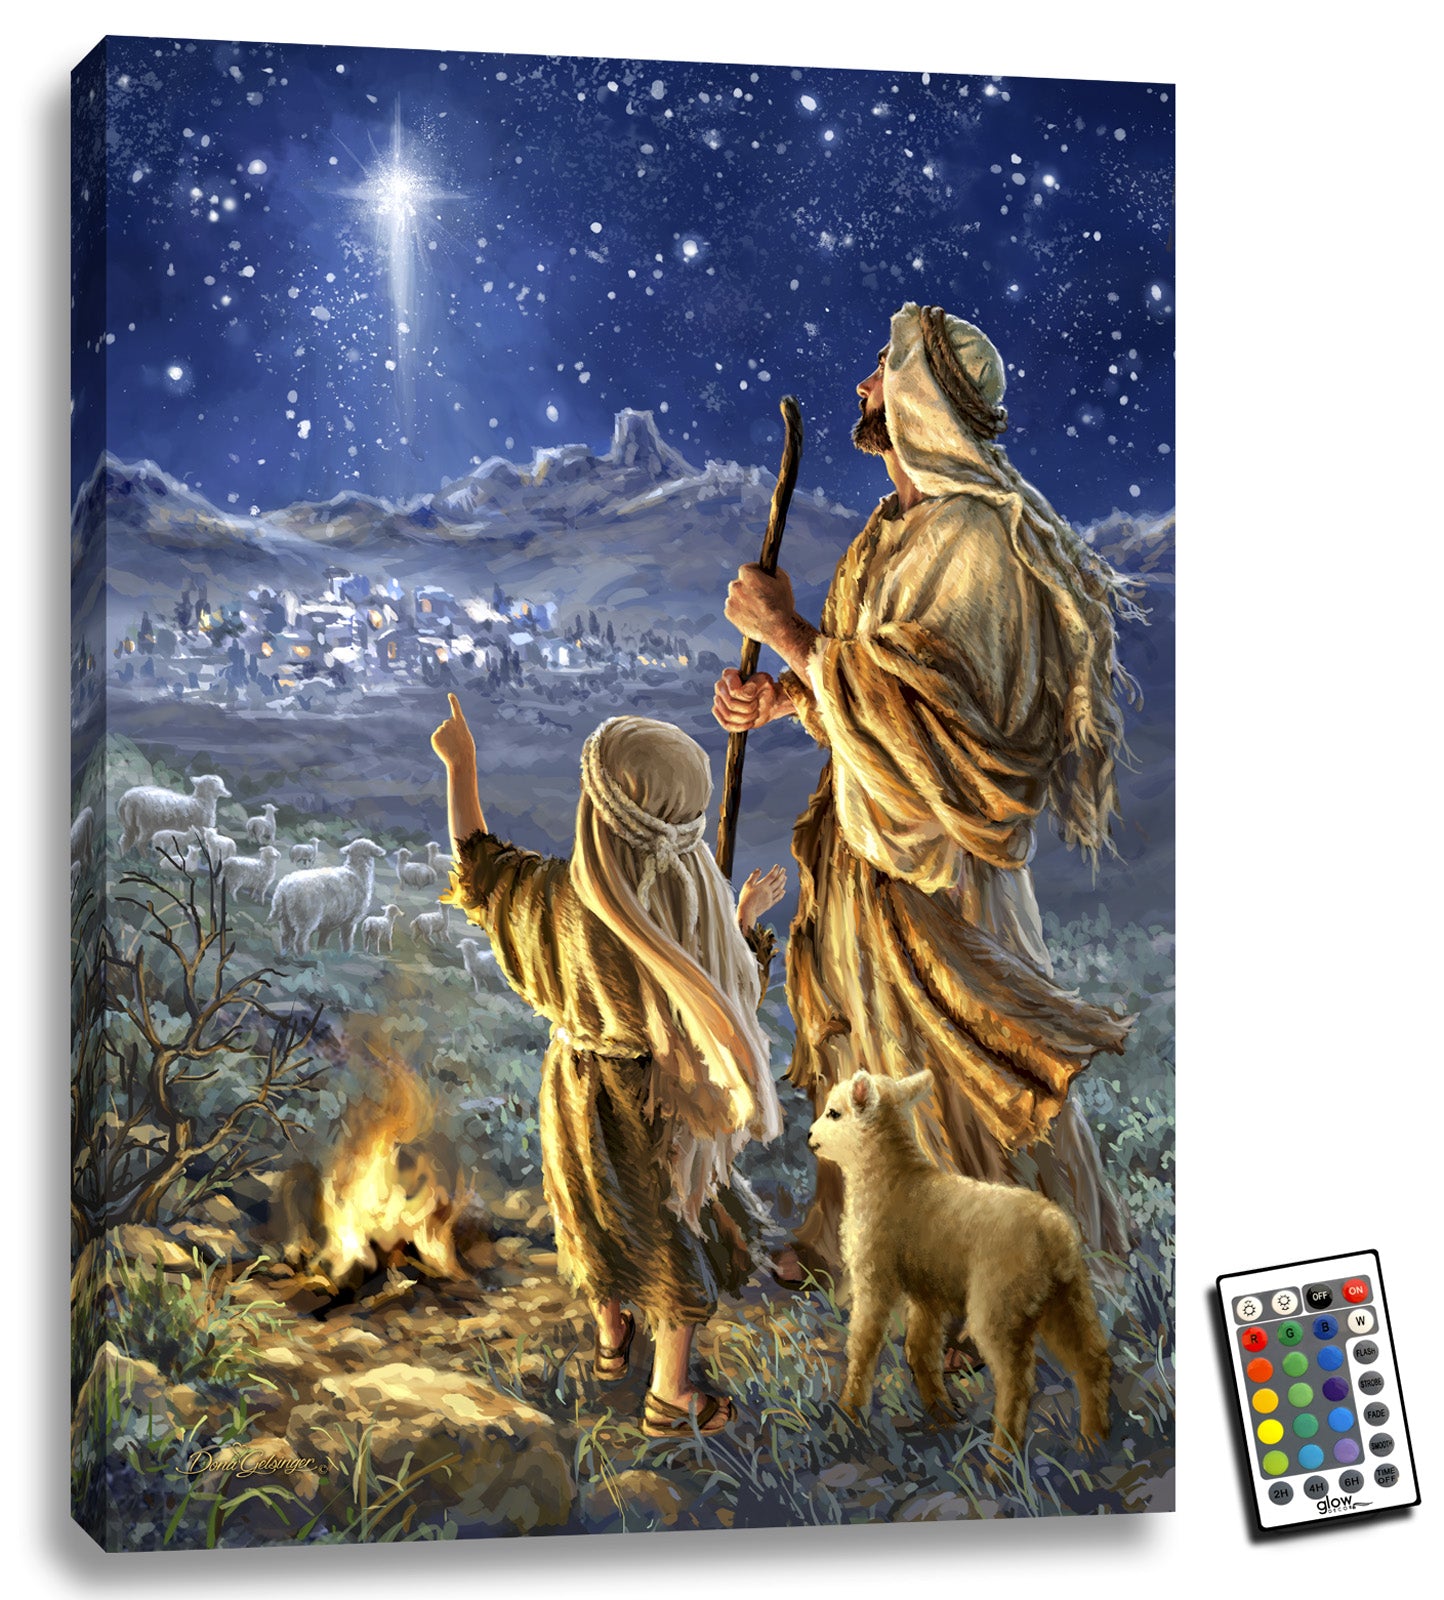  This stunning piece features a heartwarming scene of a shepherd and his son standing by a cozy fire, both of them gazing up at a bright and beautiful star in the sky. The young boy points excitedly at the star, while a curious lamb looks on.  In the distance, the rest of the shepherd's flock can be seen grazing peacefully in the field. And just beyond them, the star illuminates the town of Bethlehem, where the Savior of the world was born.